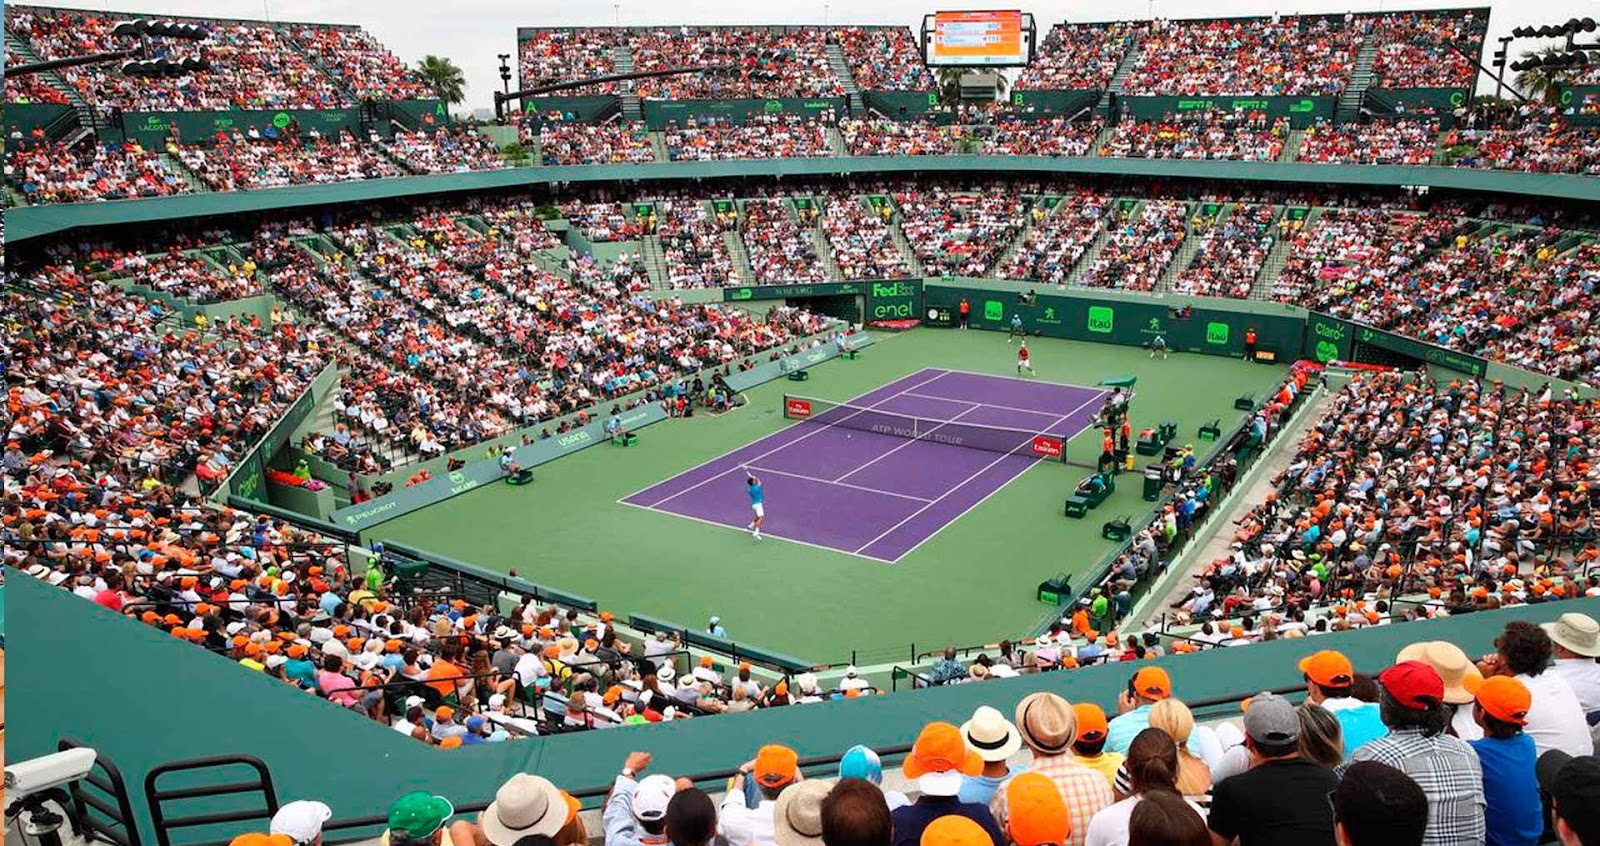 Open hard courts in Miami